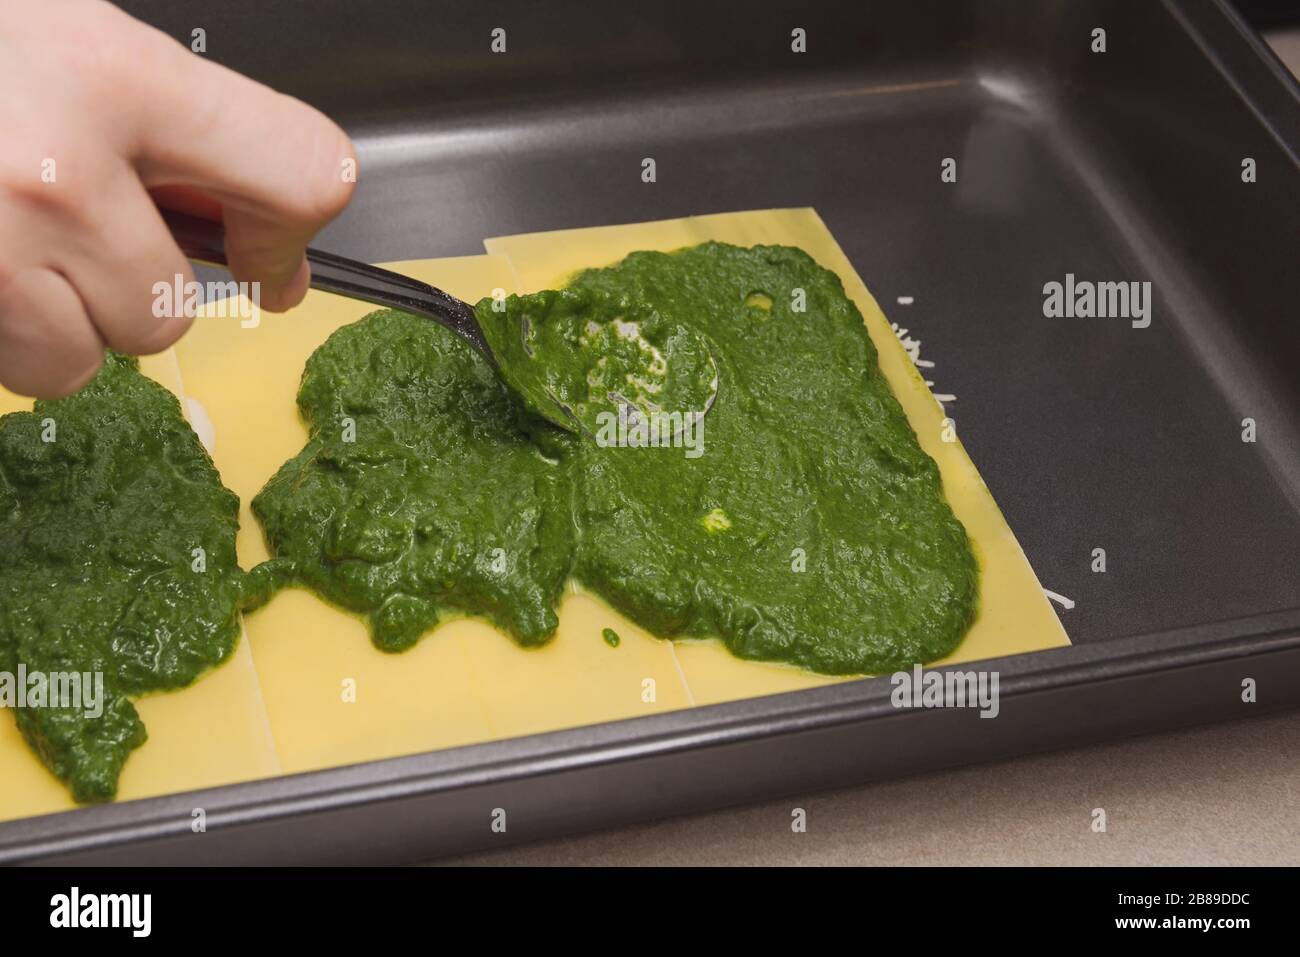 Putting Spinach Sauce on Raw Lasagne Pasta in Baking Sheet Stock Photo